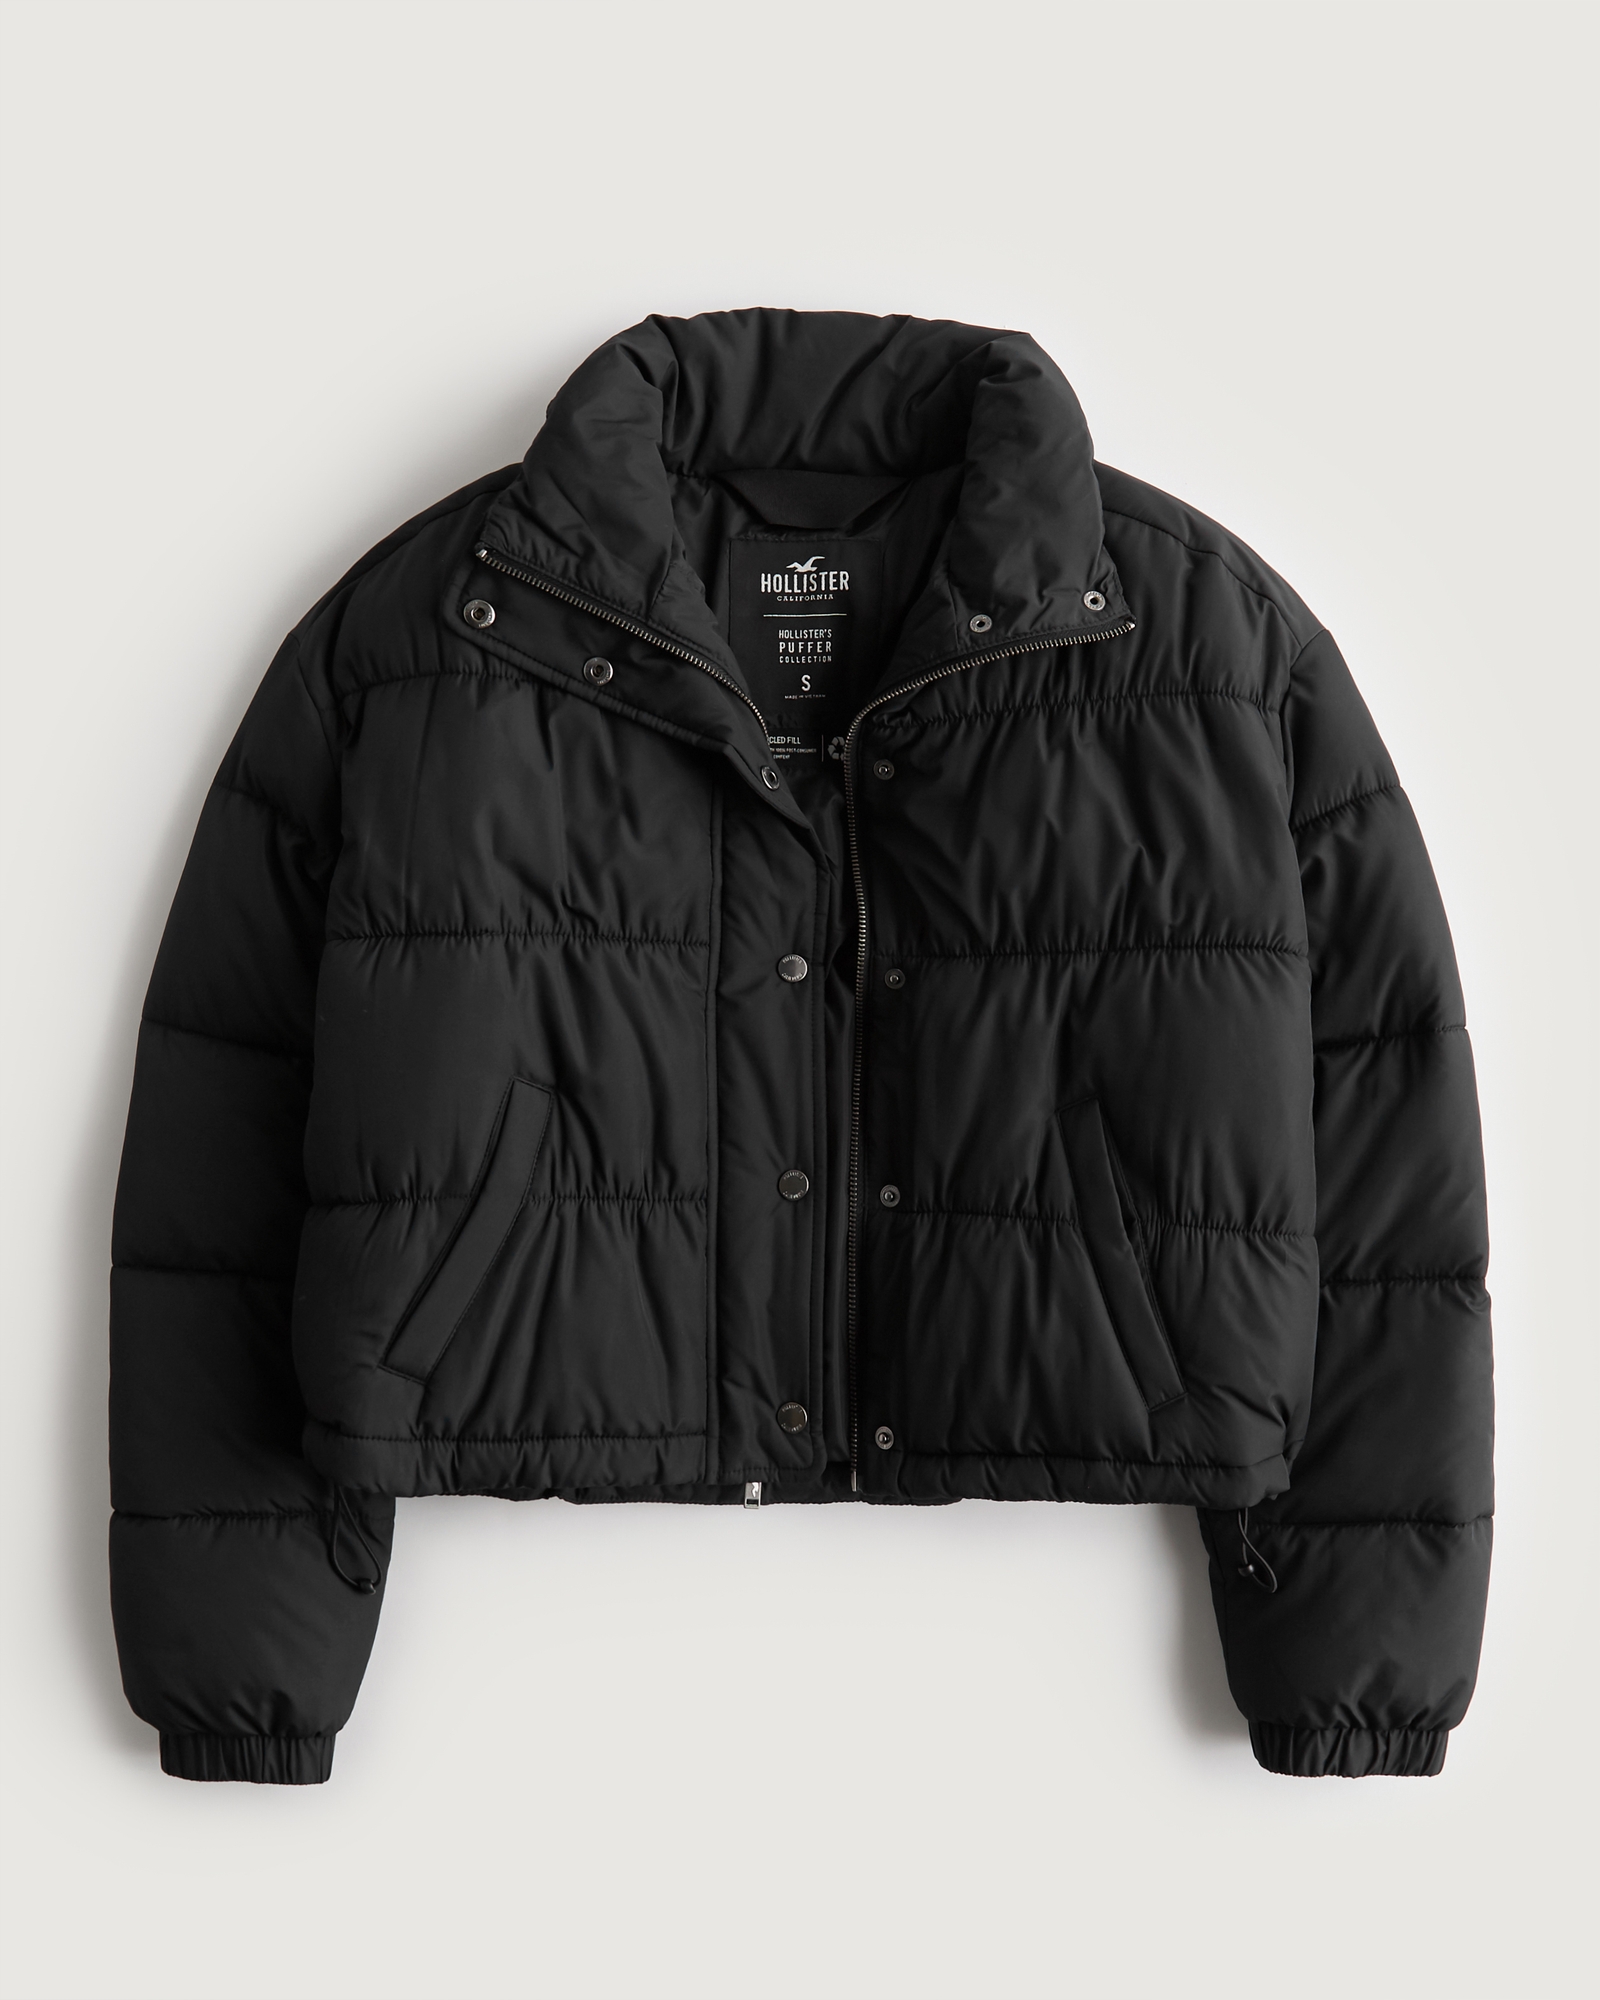 https://img.hollisterco.com/is/image/anf/KIC_344-2634-0953-900_prod1.jpg?policy=product-extra-large